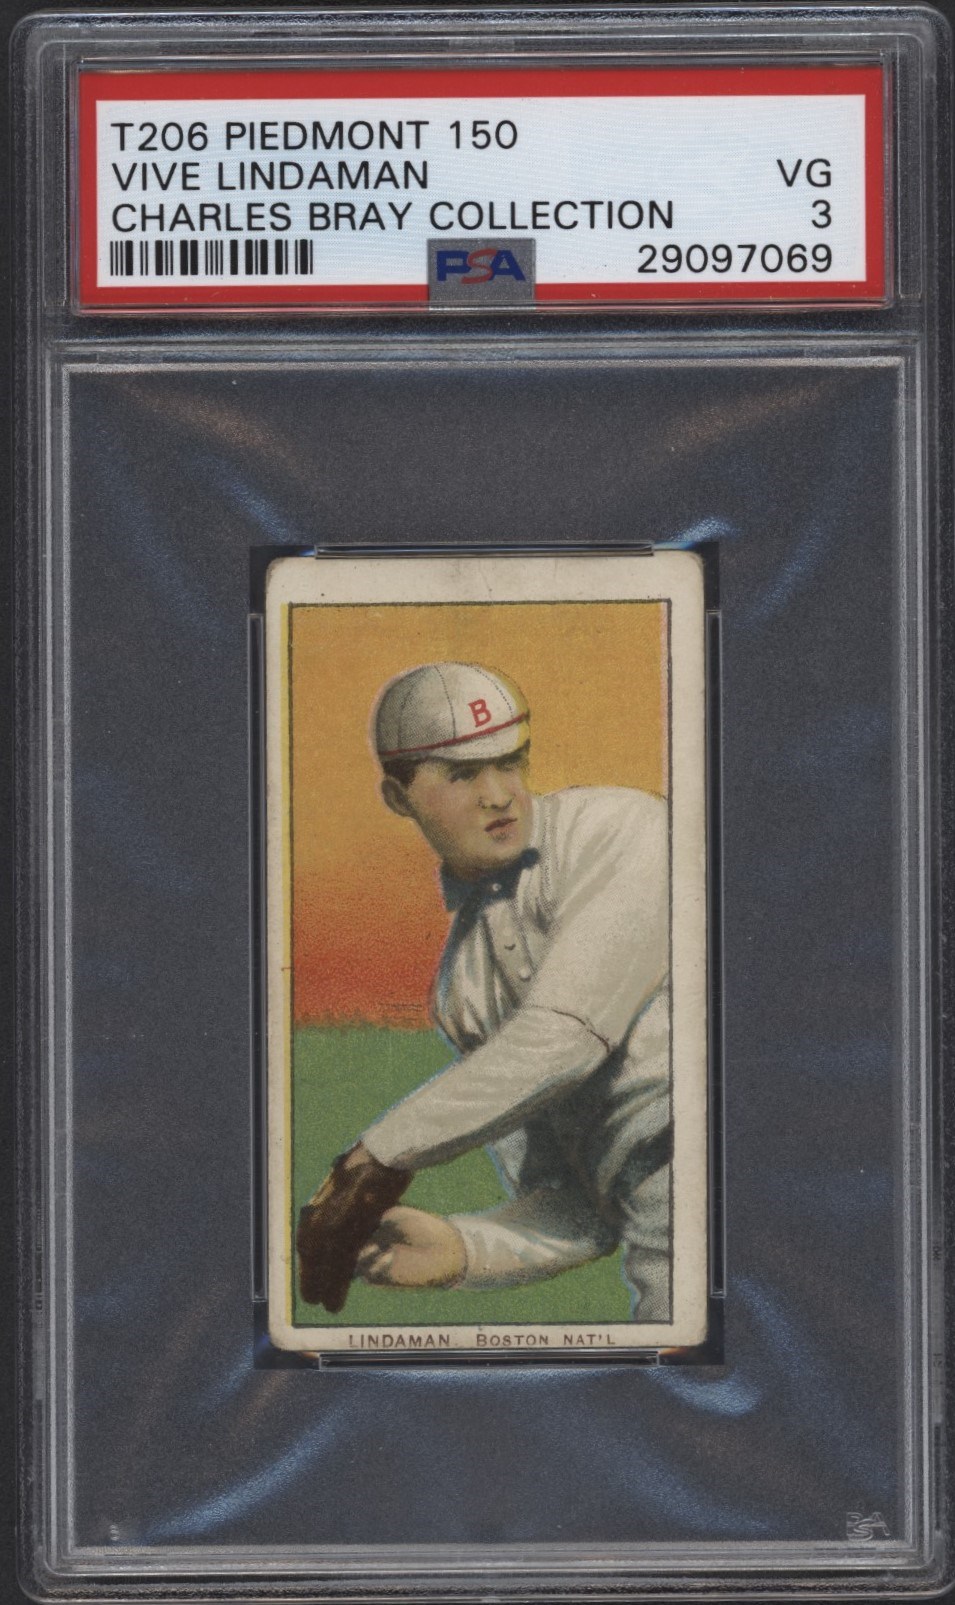 - T206 Piedmont 150 Vive Lindaman PSA 3 From the Charles Bray Collection